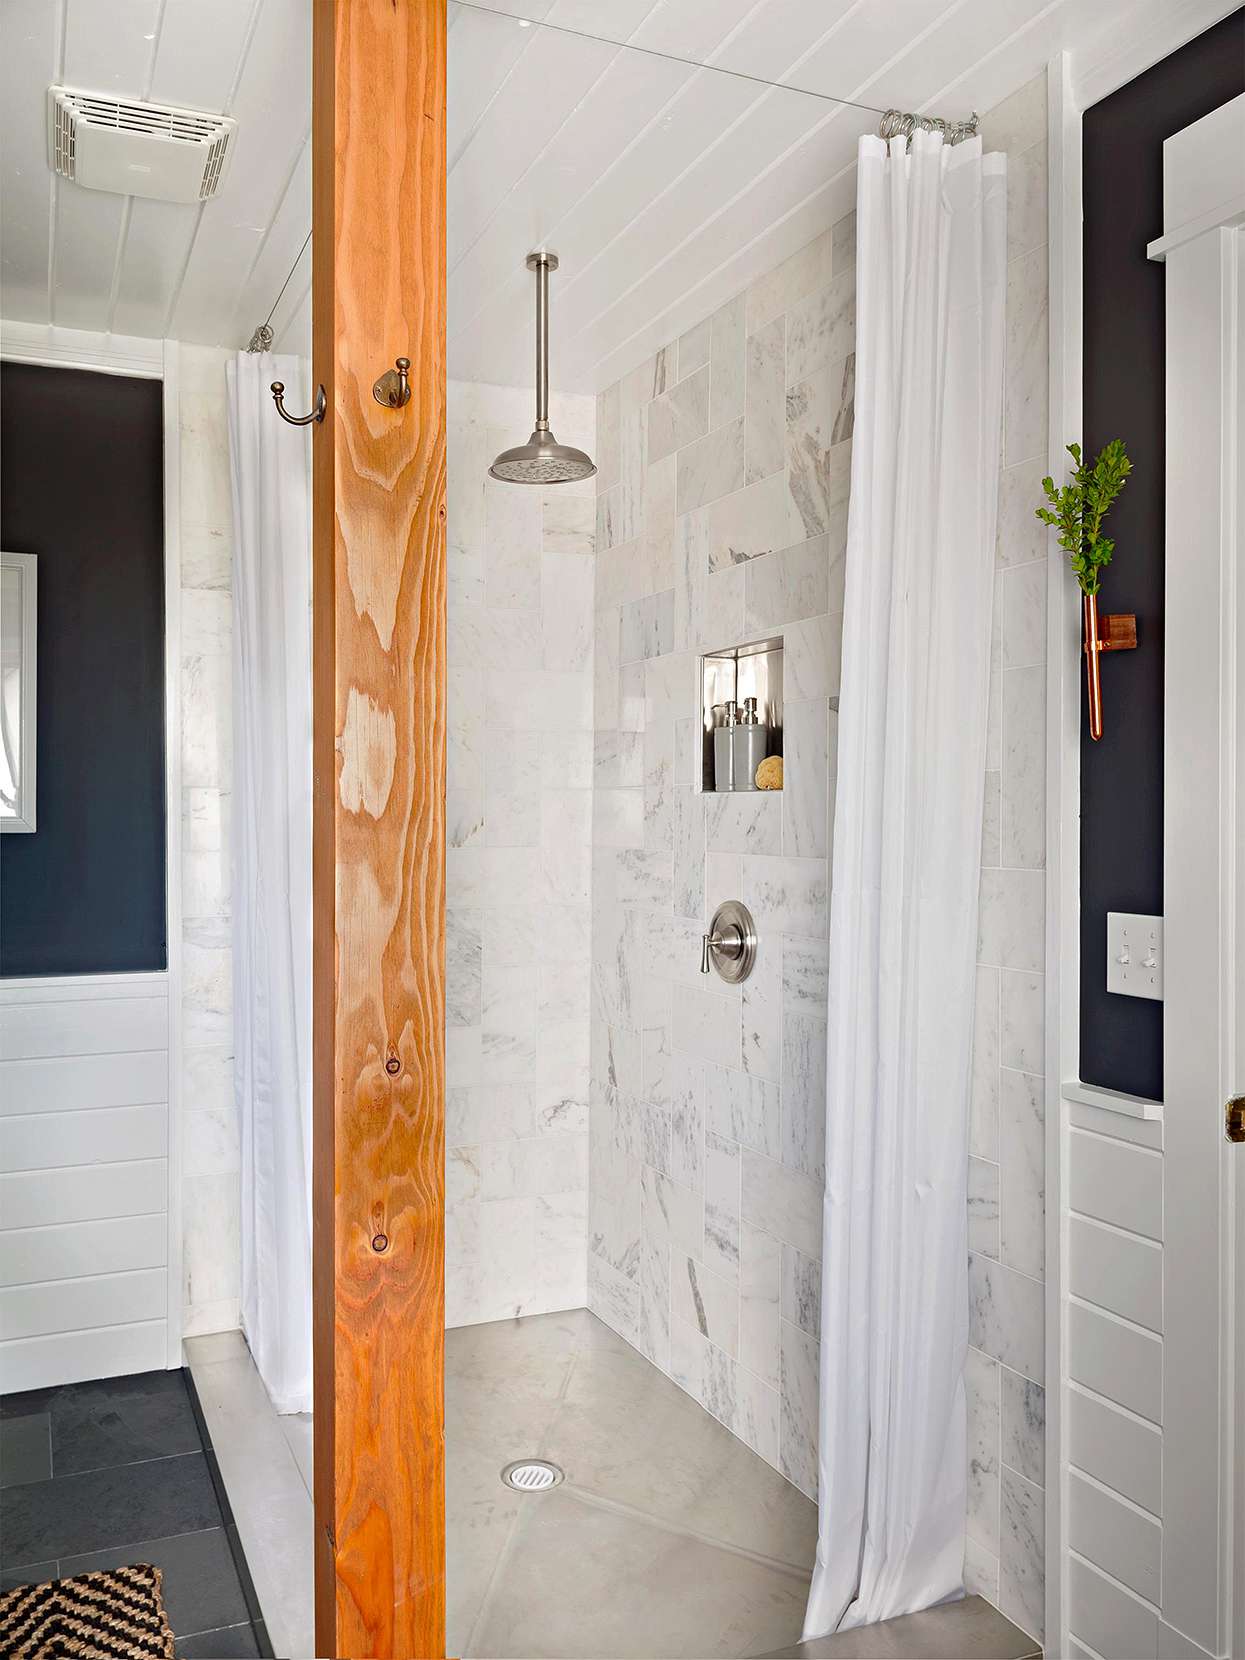 wood beam and hanging curtains in tile cornered shower